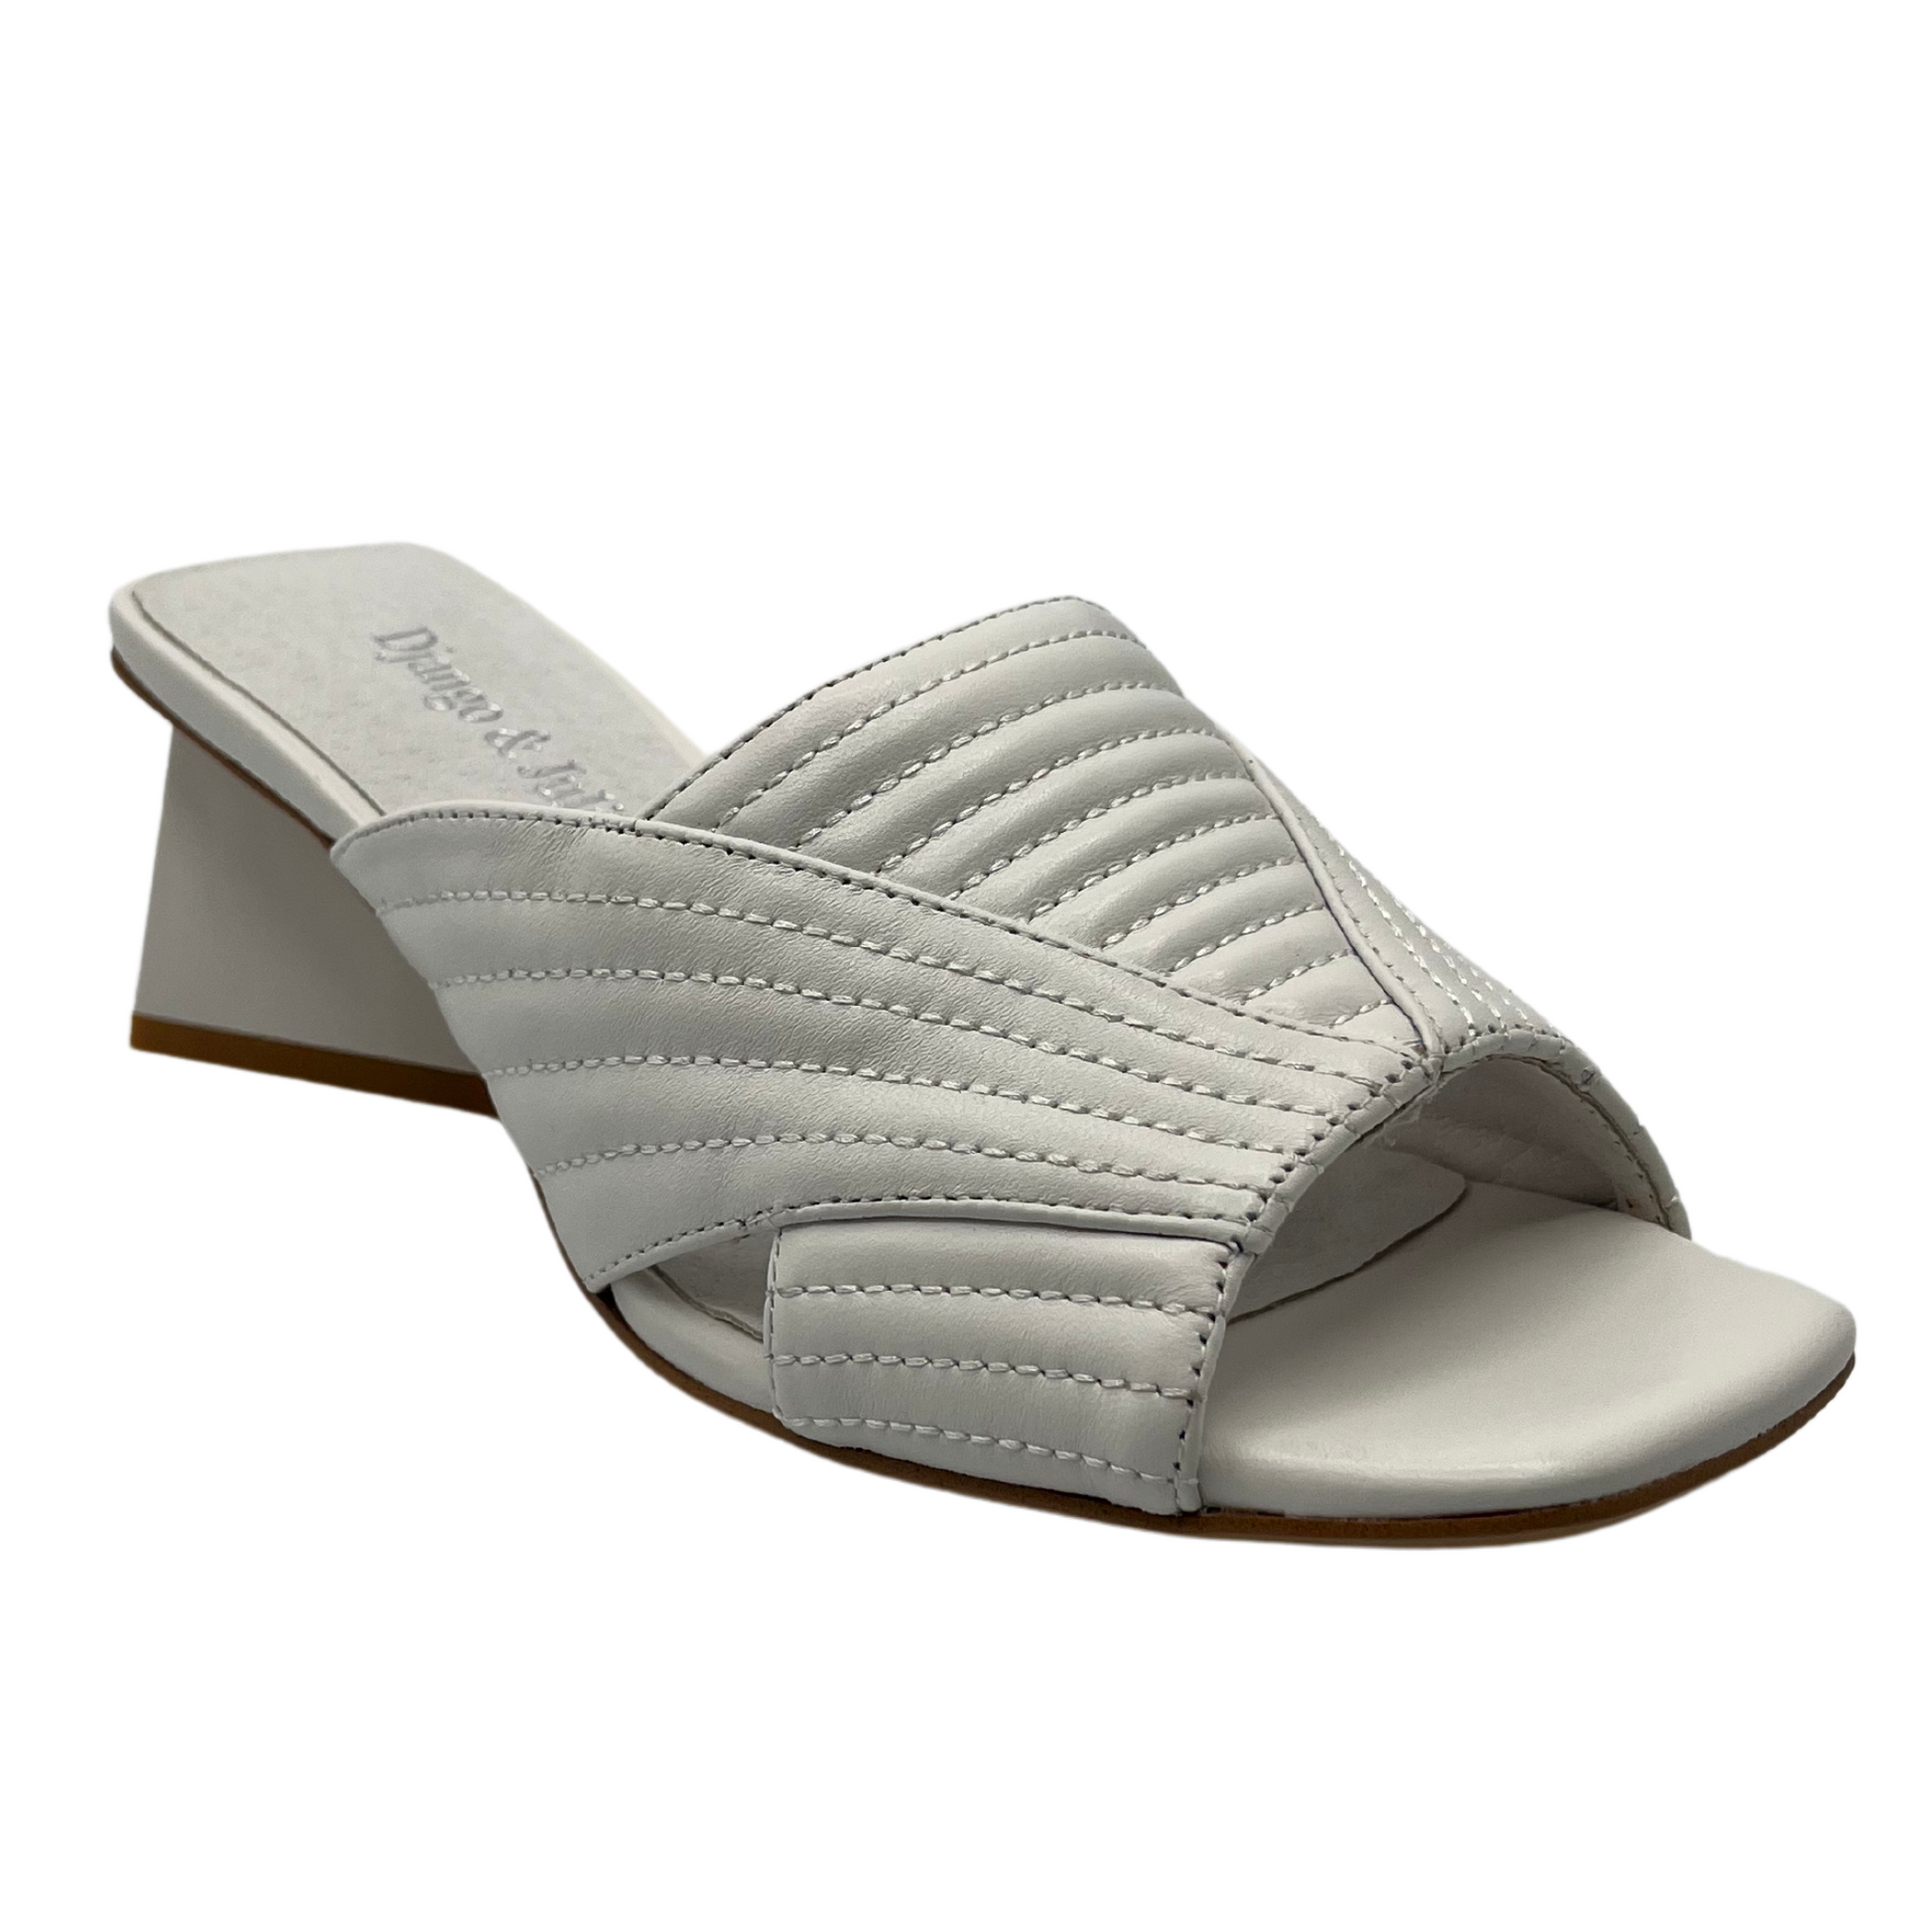 45 degree angled view of white leather sandal with square toe and triangular heel